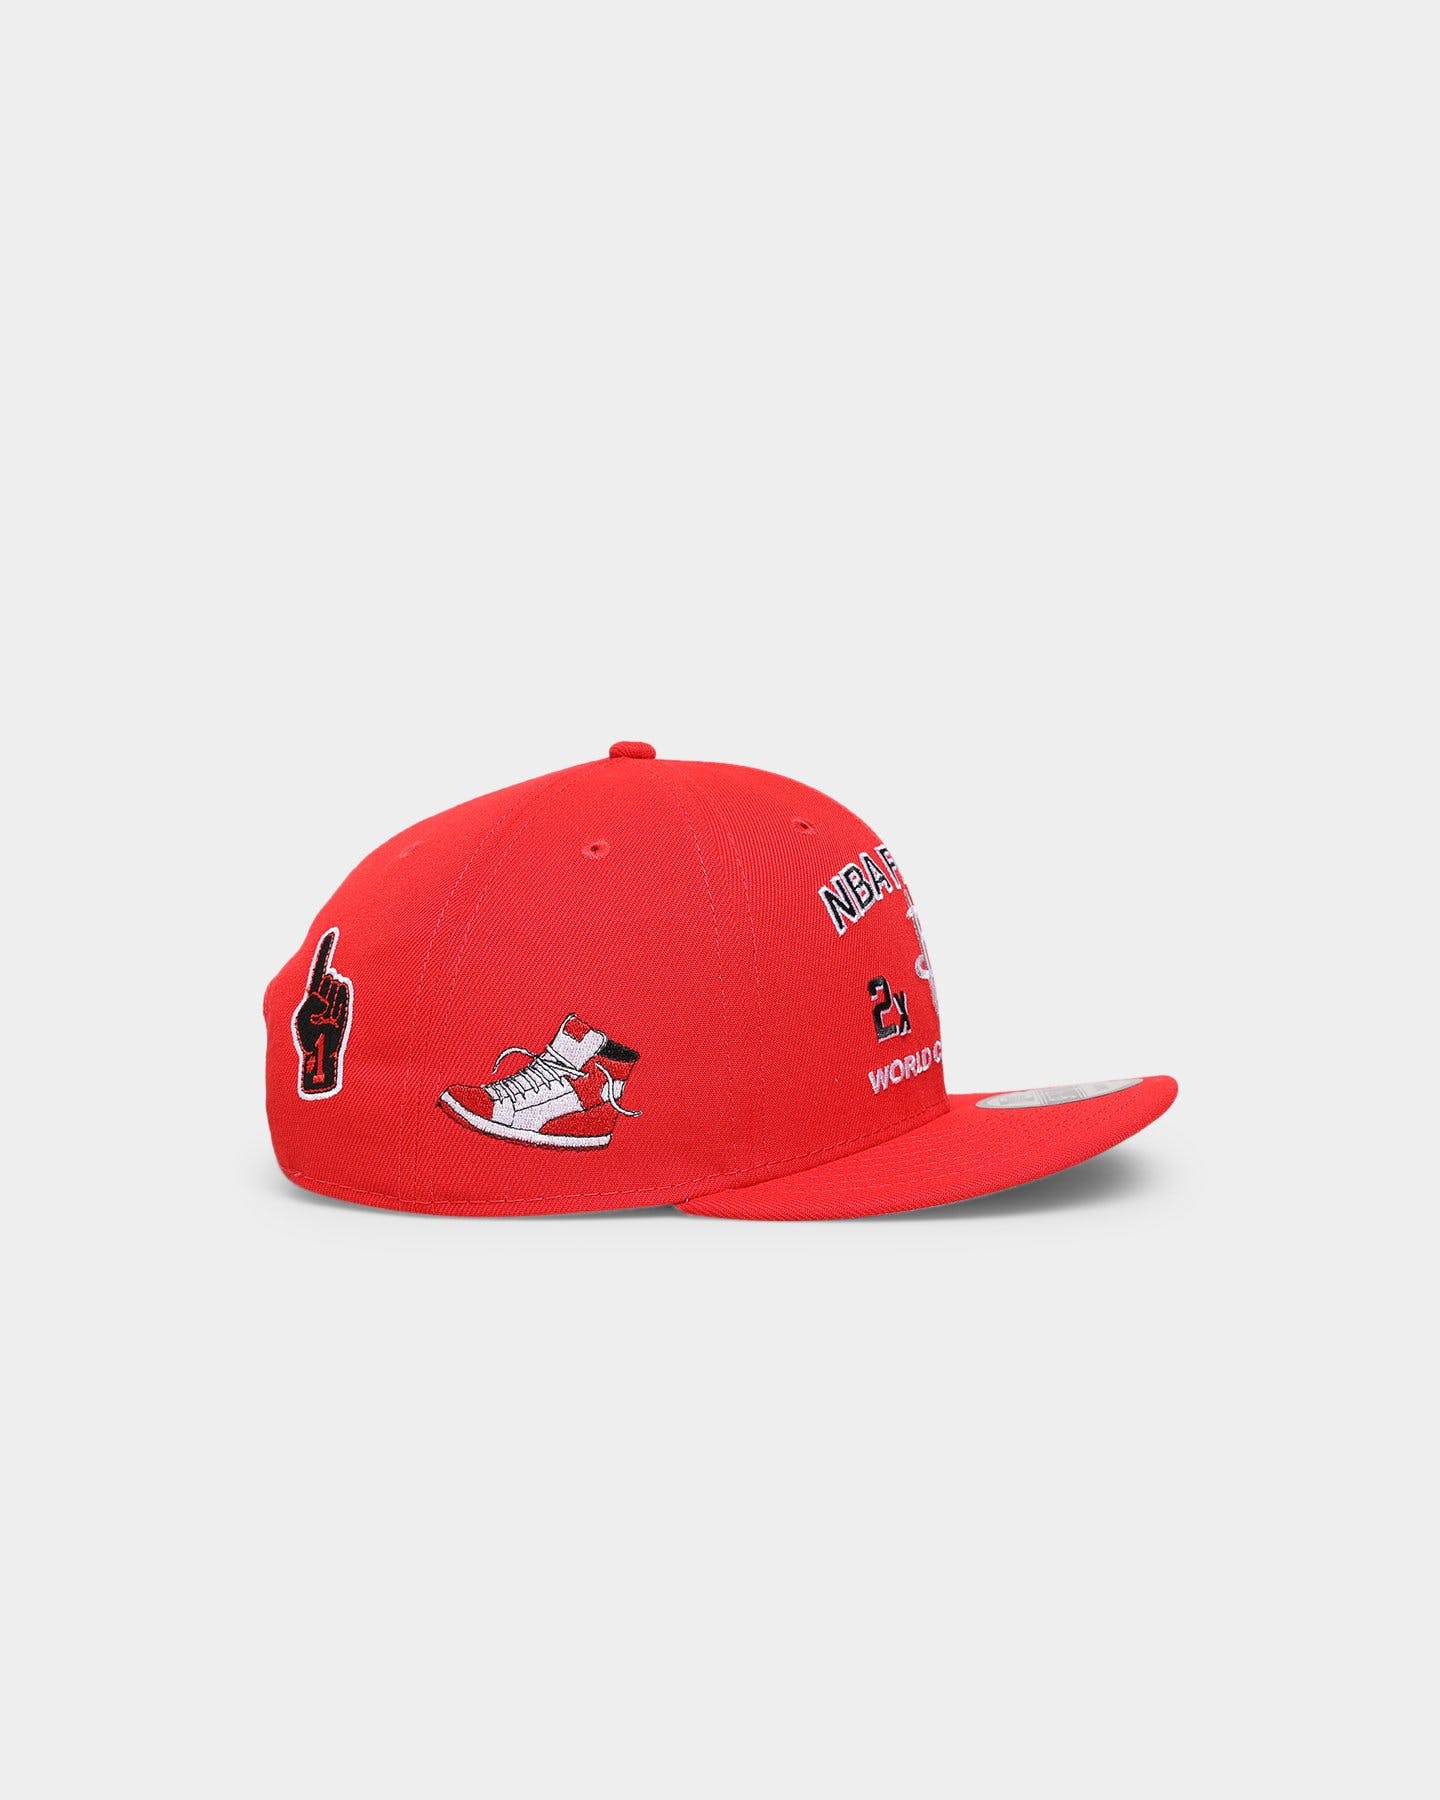 HOUSTON ROCKETS FINALS ICON 9FIFTY